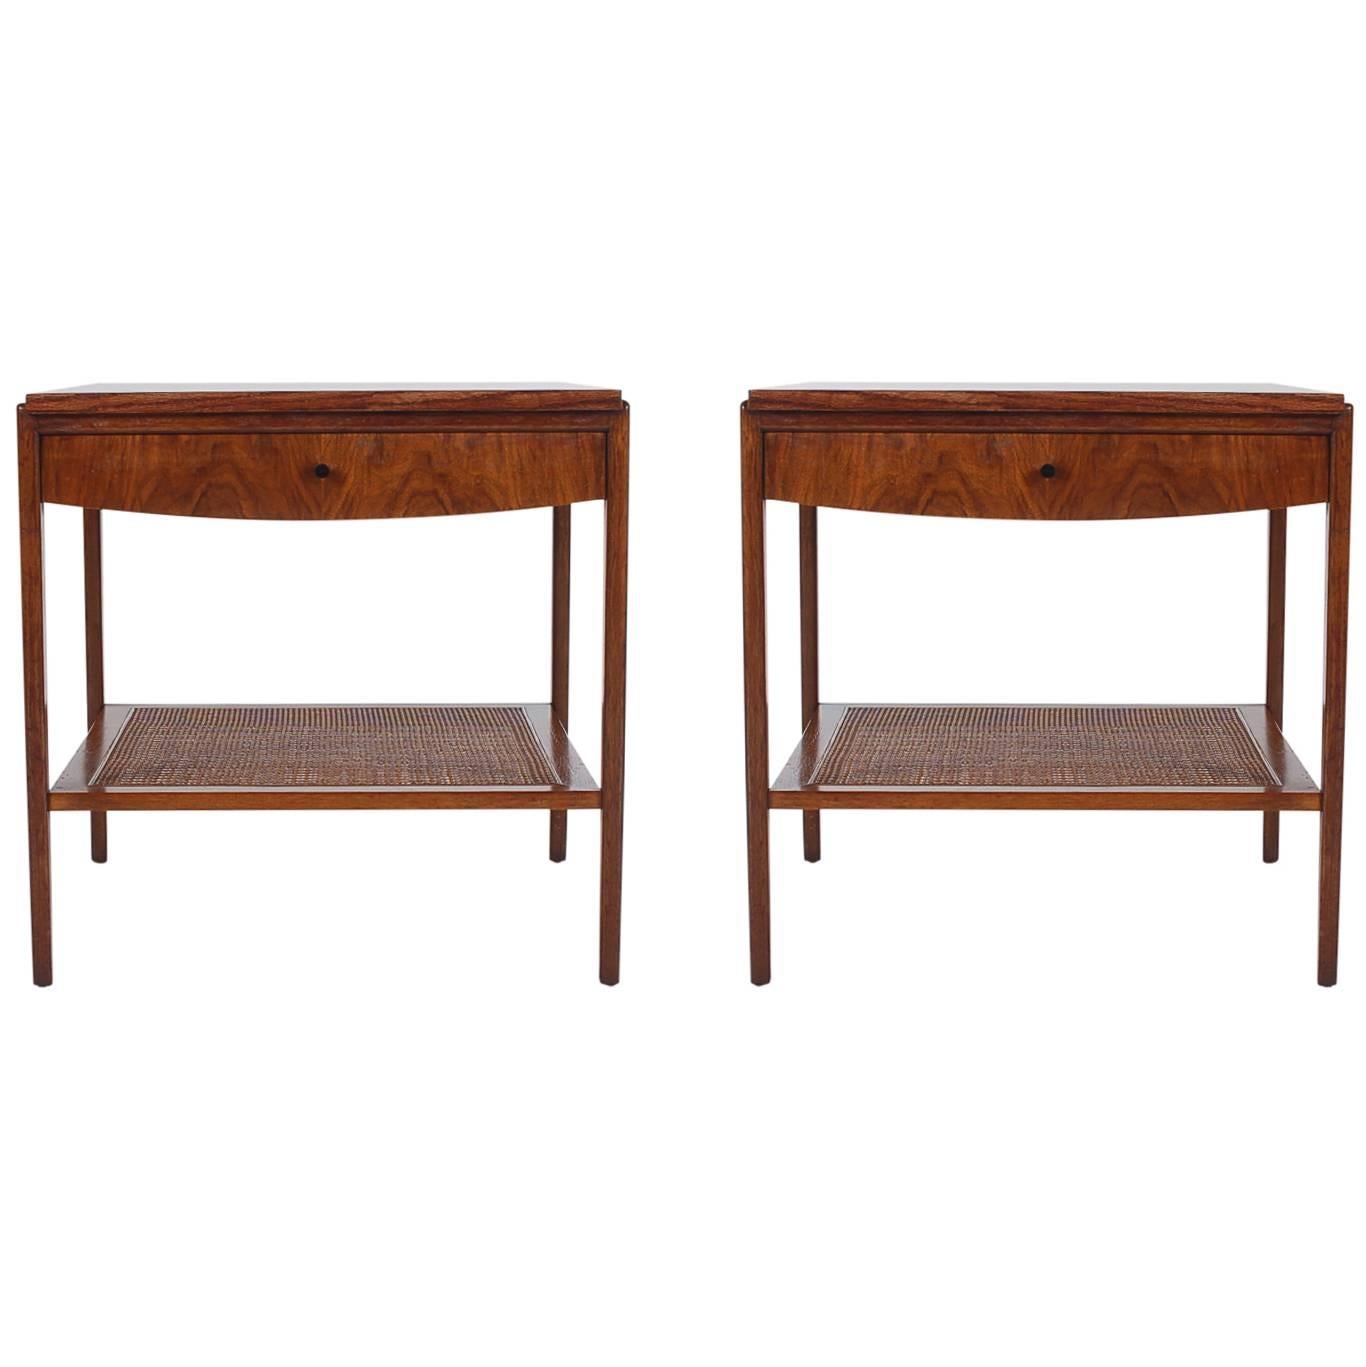 Mid-Century Modern Walnut and Cane End Tables or Nightstands by John Widdicomb